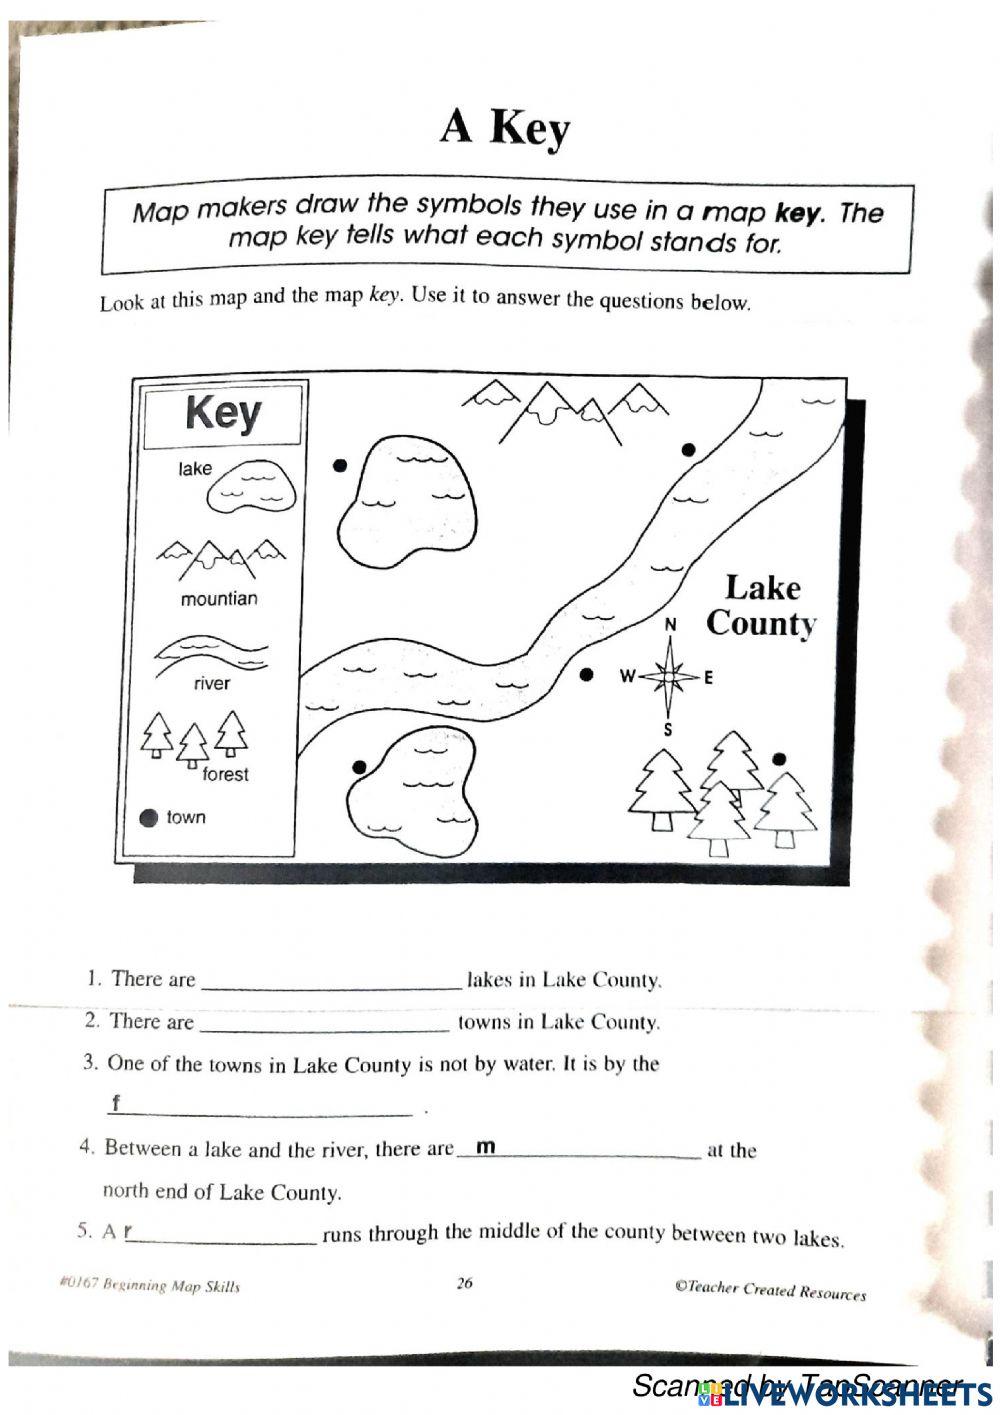 Parts of a Map practice worksheet